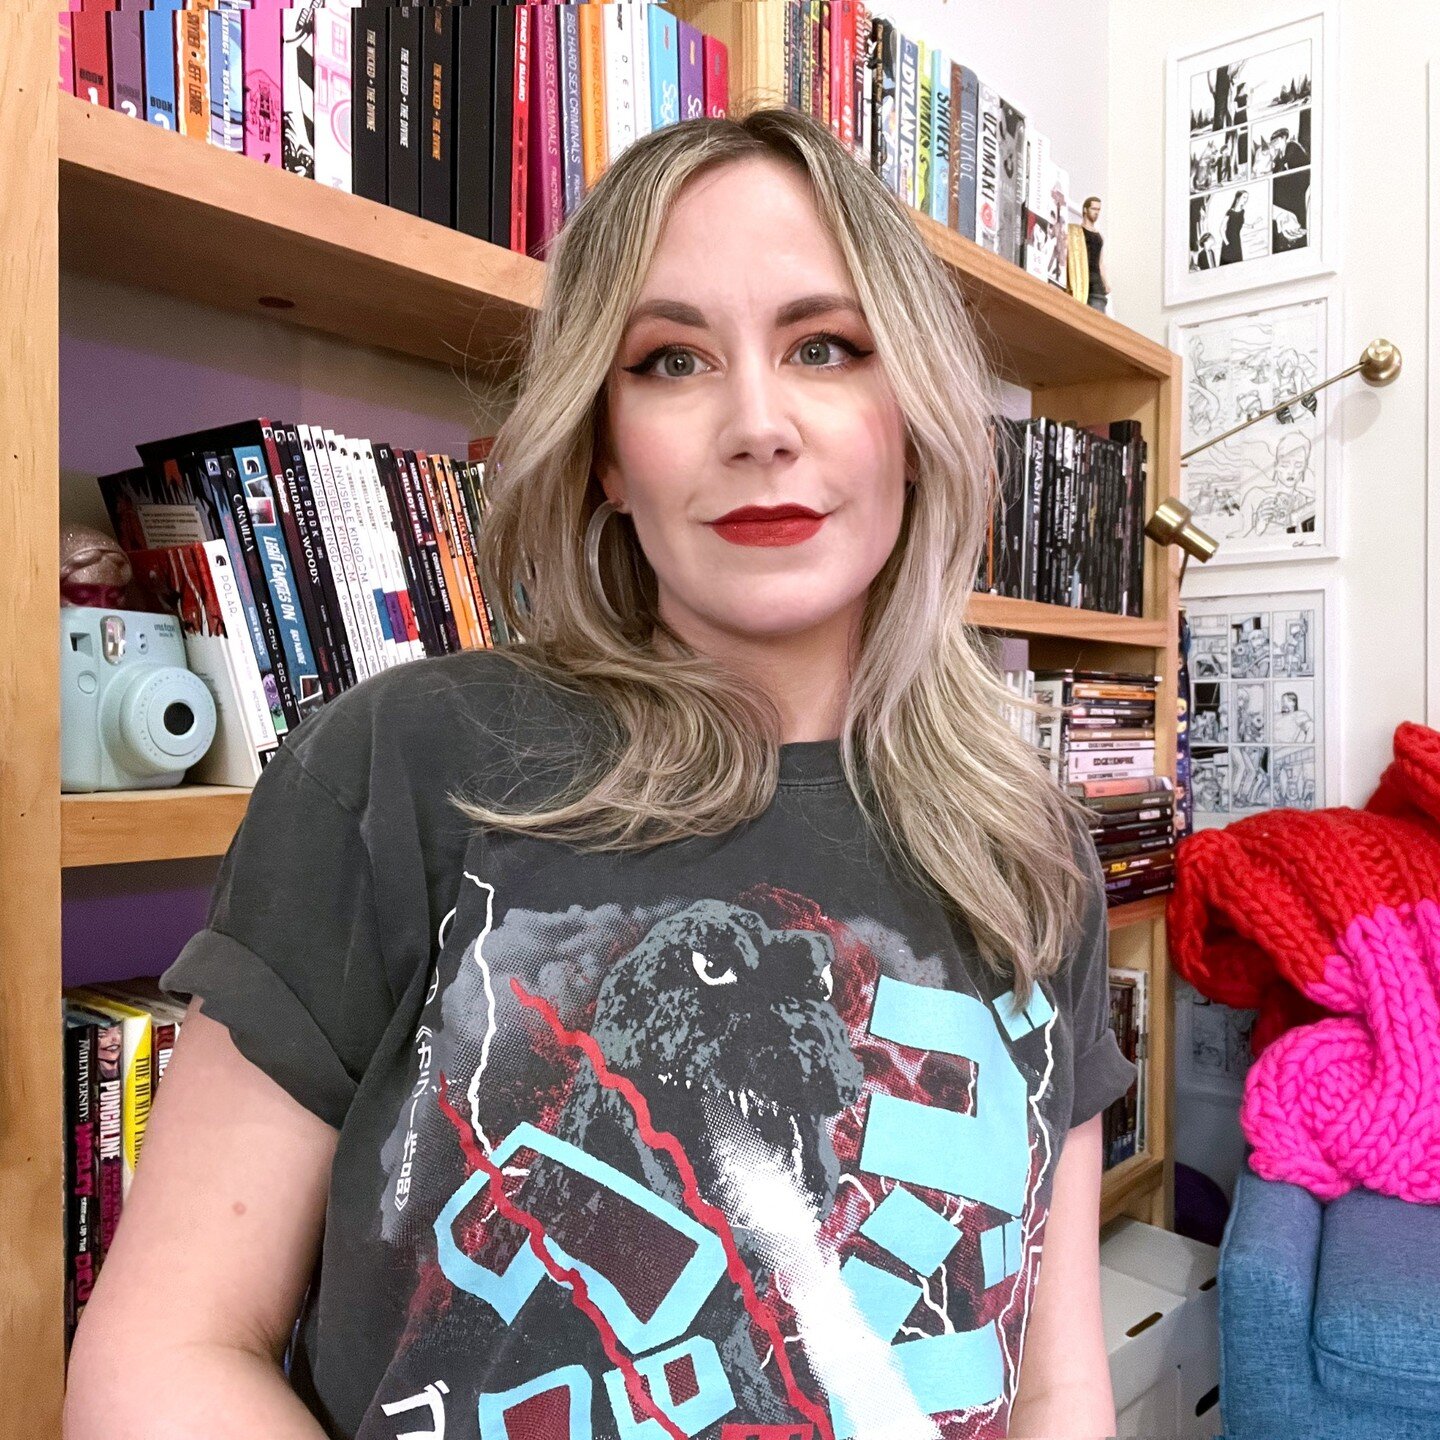 Thrilled to share my recent interview with Canvas Rebel! @canvasrebel 🎨✨ Dive into the convo to where I discuss my comics journey! Thank you @geekgirlstrong for recommending me! #CanvasRebel #ArtistInterview #ArtisticJourney